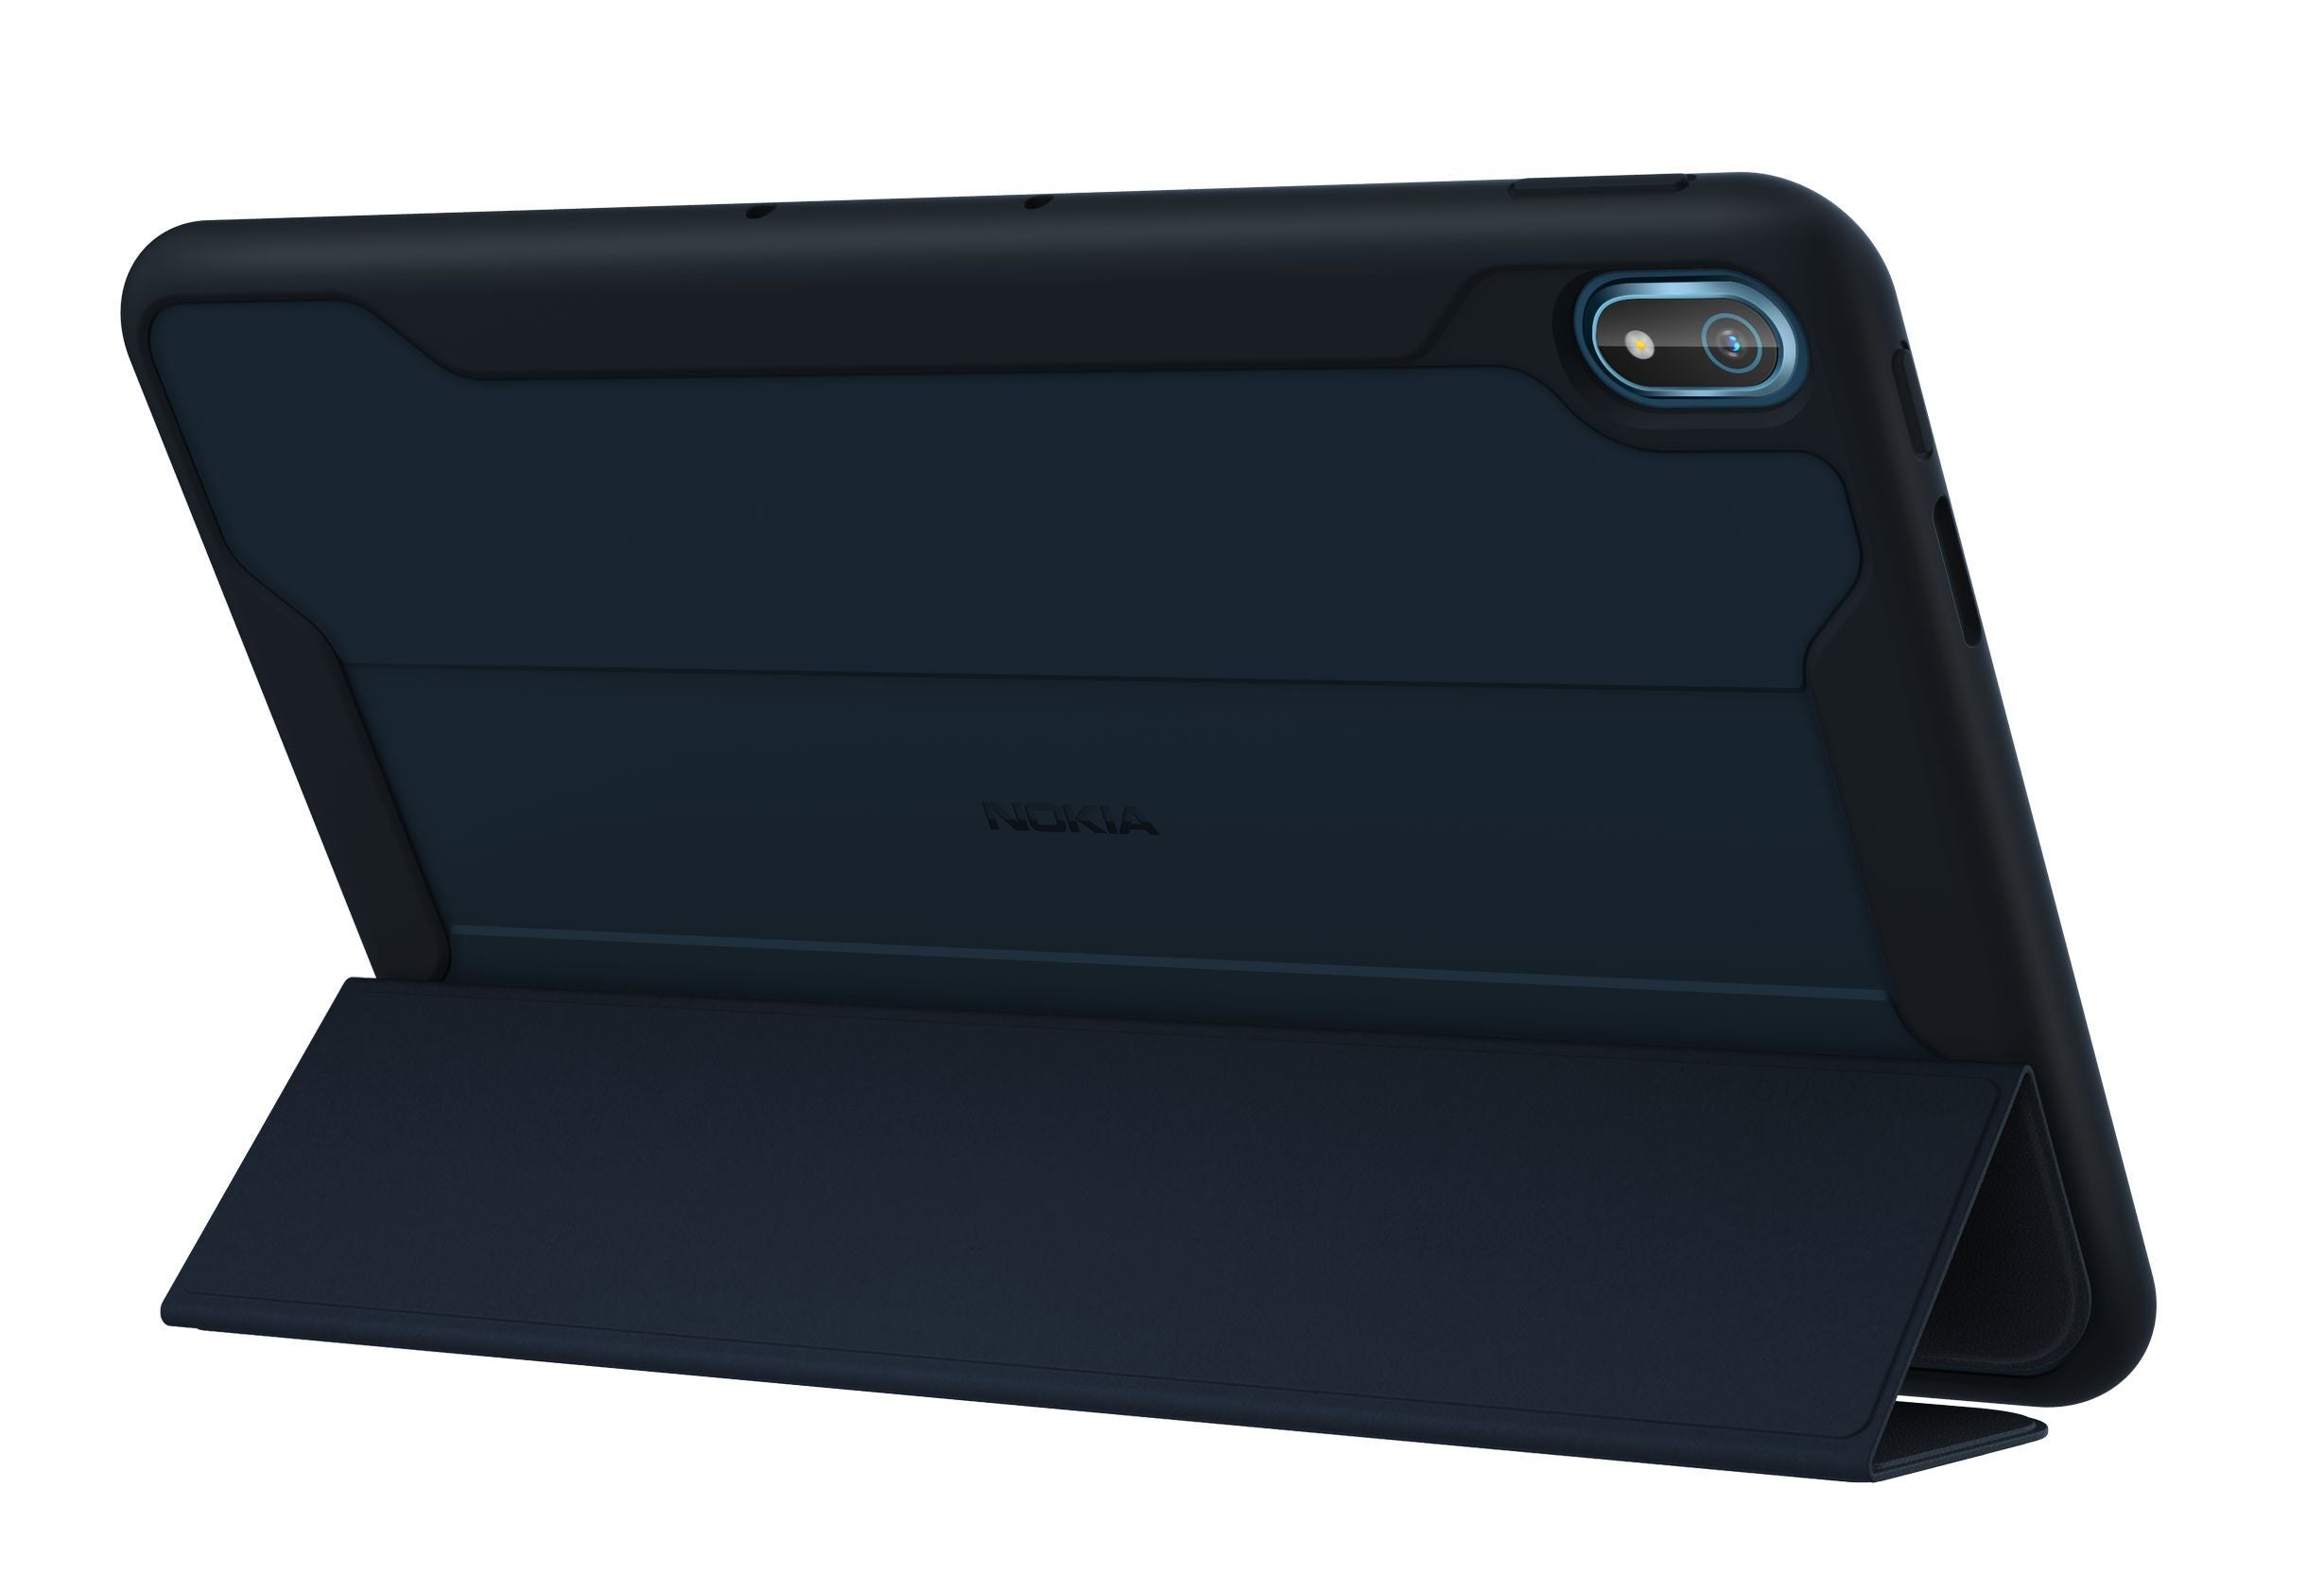 A rugged flip cover with a stand function will be offered for the Nokia T20 - Budget Nokia Т20 tablet is here with a 10.4-inch screen and an aluminum body